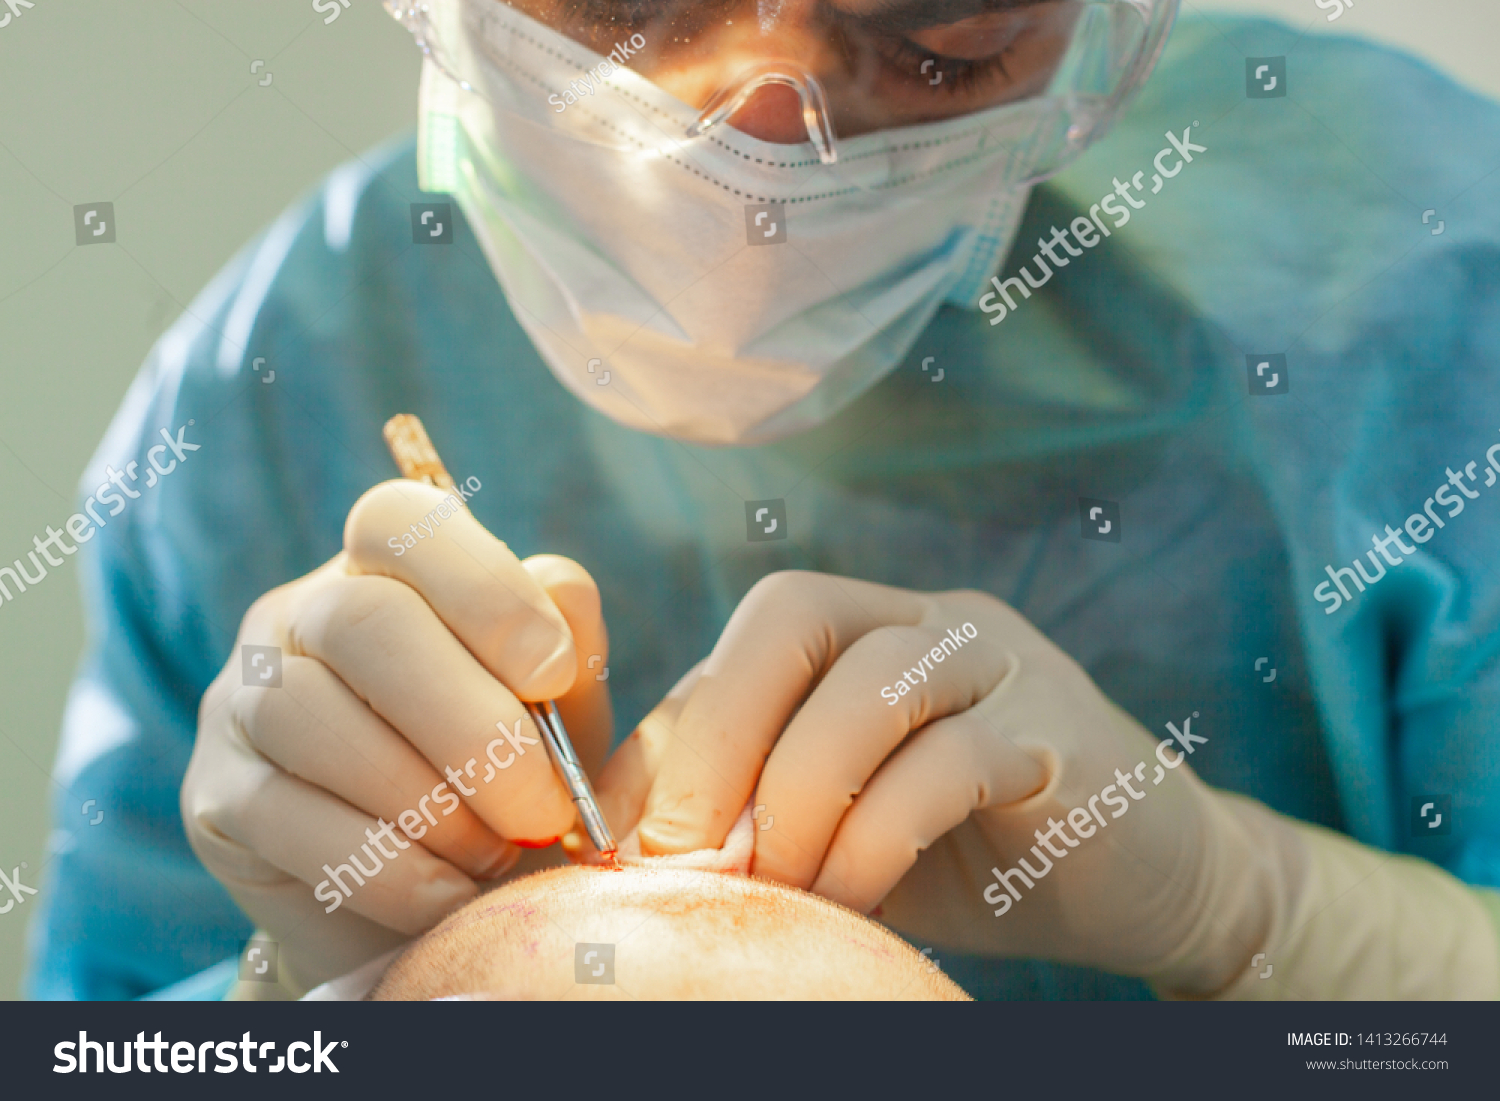 Baldness treatment. Hair transplant. Surgeons in the operating room carry out hair transplant surgery. Surgical technique that moves hair follicles from a part of the head. #1413266744